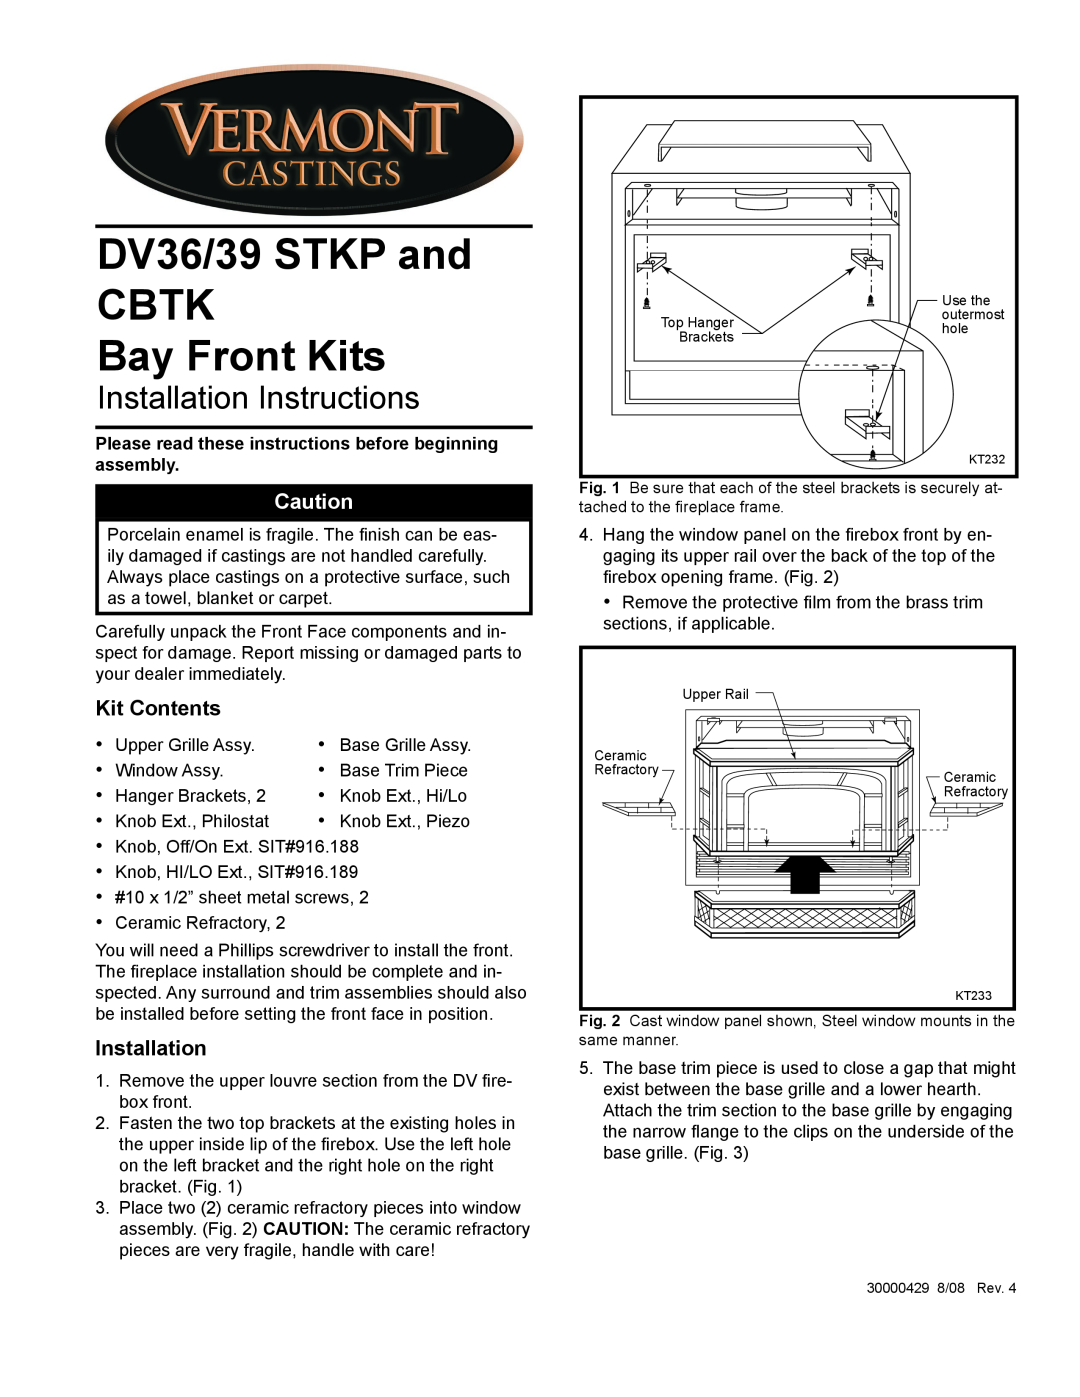 Vermont Casting installation instructions Kit Contents, Installation, DV36/39 STKP and CBTK Bay Front Kits 